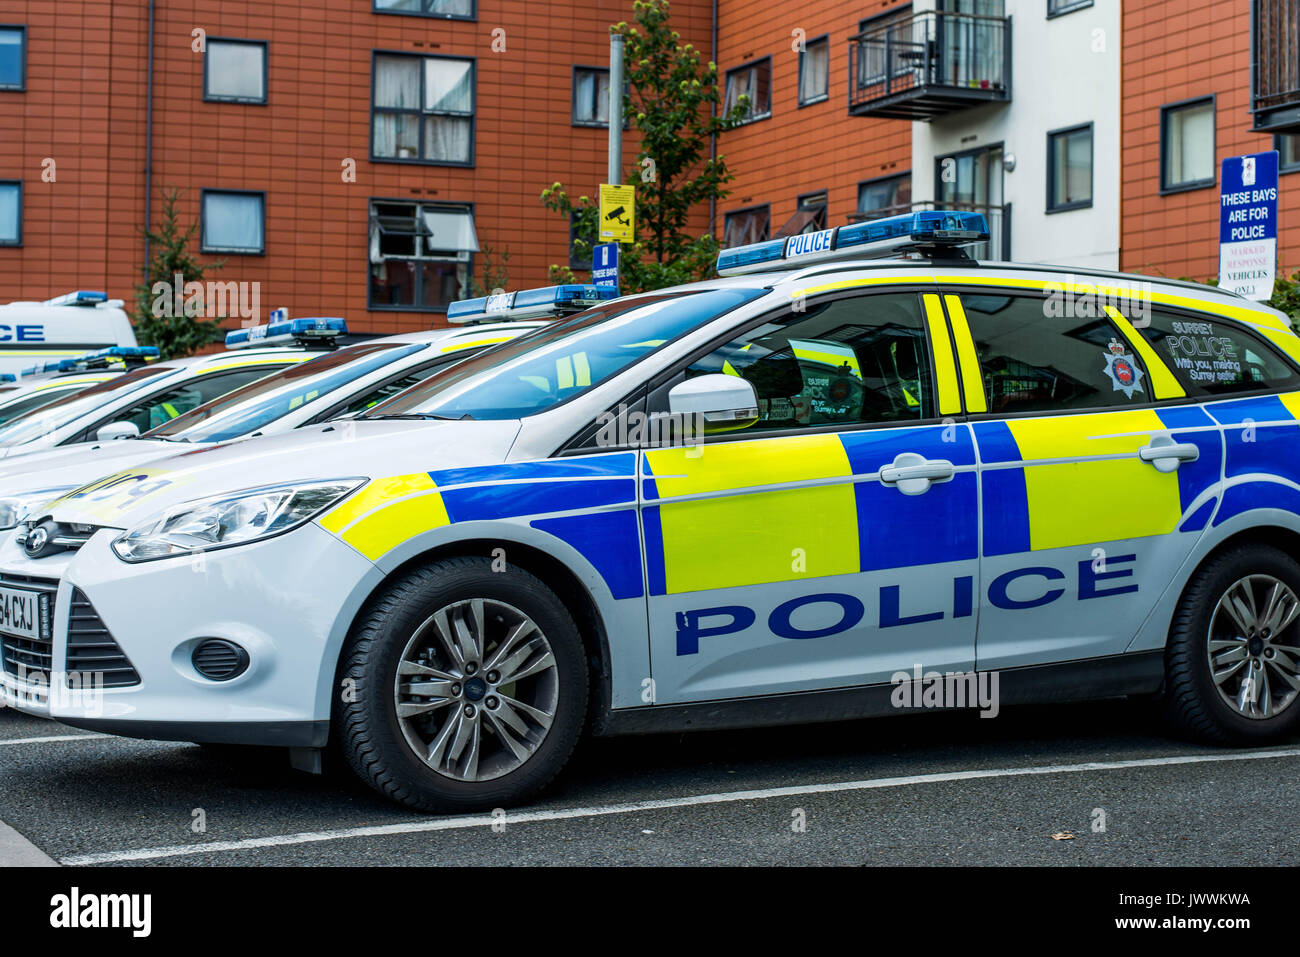 Marked Police Cars High Resolution Stock Photography And Images Alamy